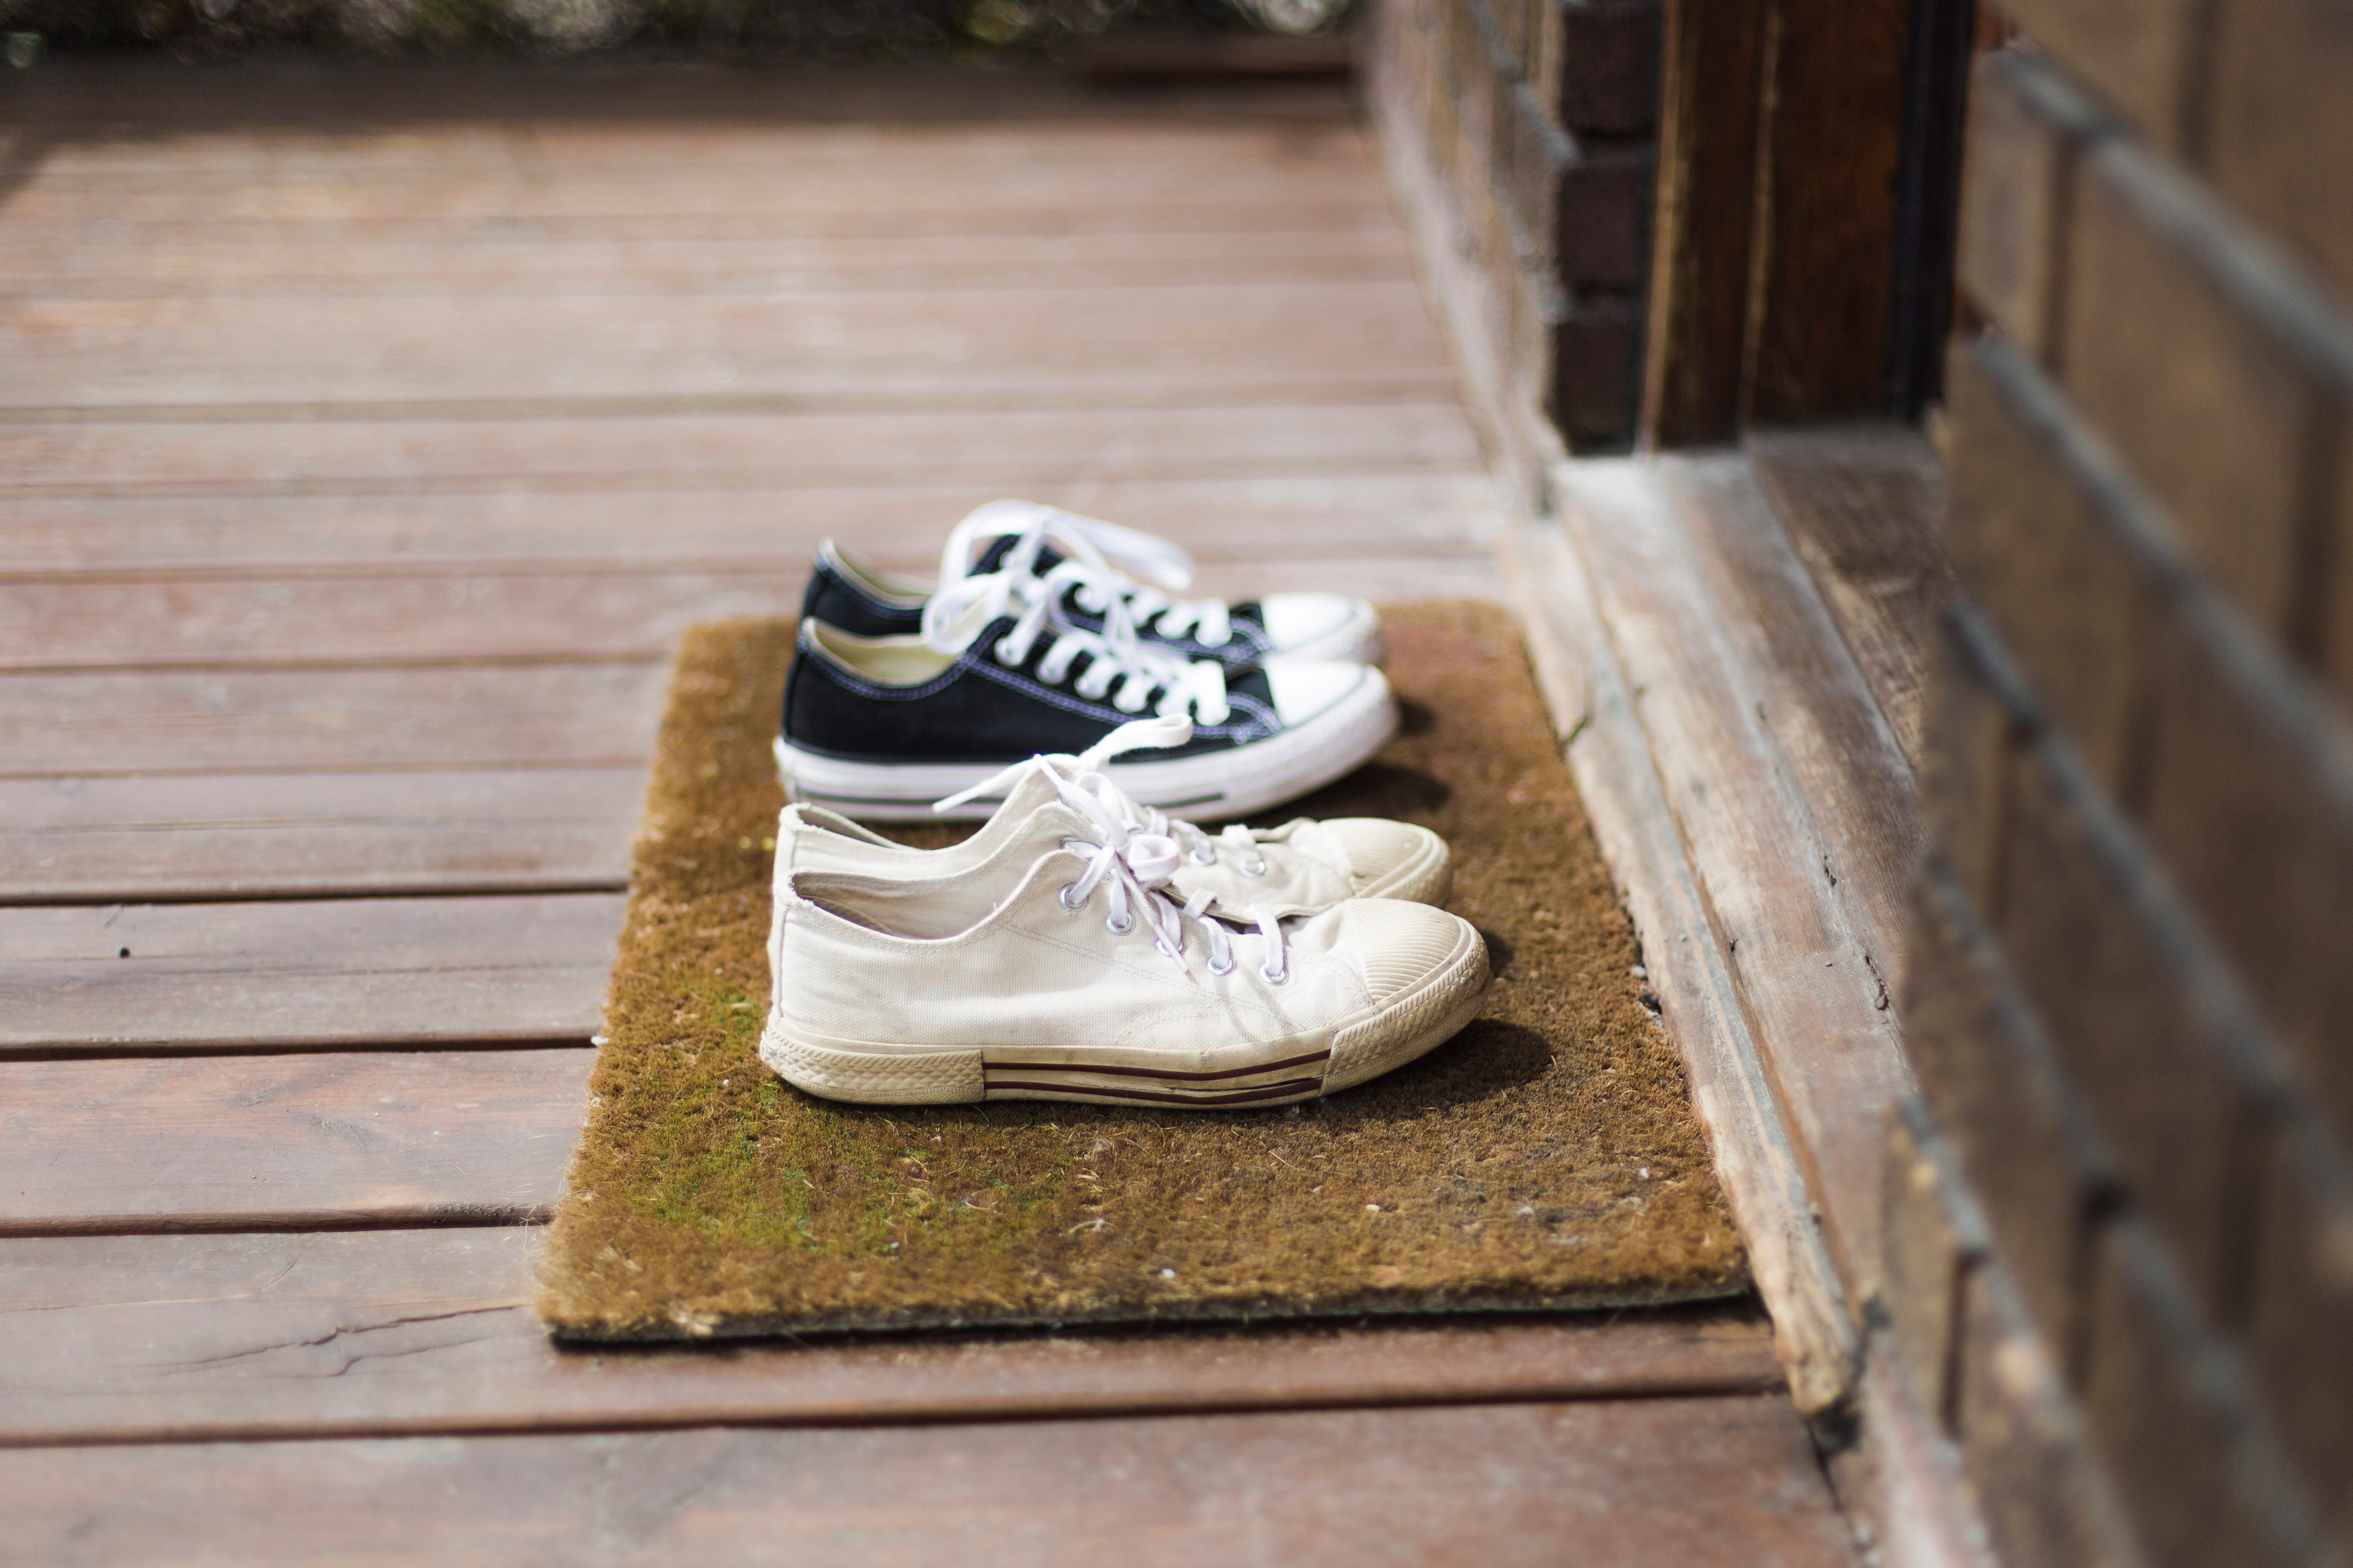 Home Moments - Two pair of black and white sneakers shoes on a porch